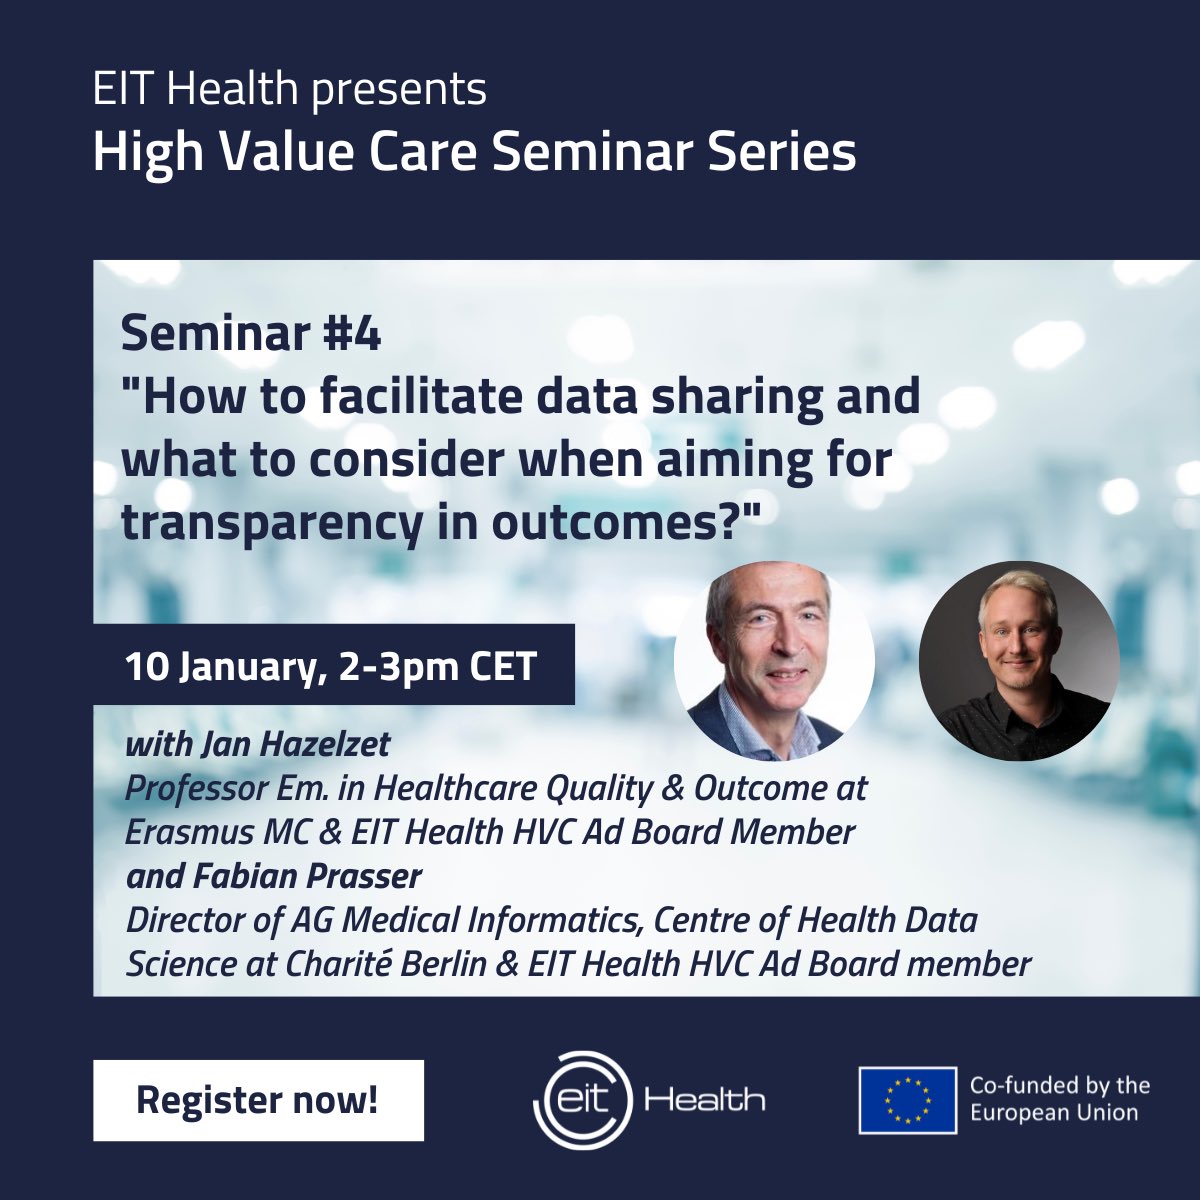 Happy New Year! Start 2023 by learning something new: 10 January: How to facilitate #data sharing and what to consider when aiming for transparency in outcomes. #eithealth #hvc 

https://t.co/g0Z2DJNsSO https://t.co/xuYS029Nrt